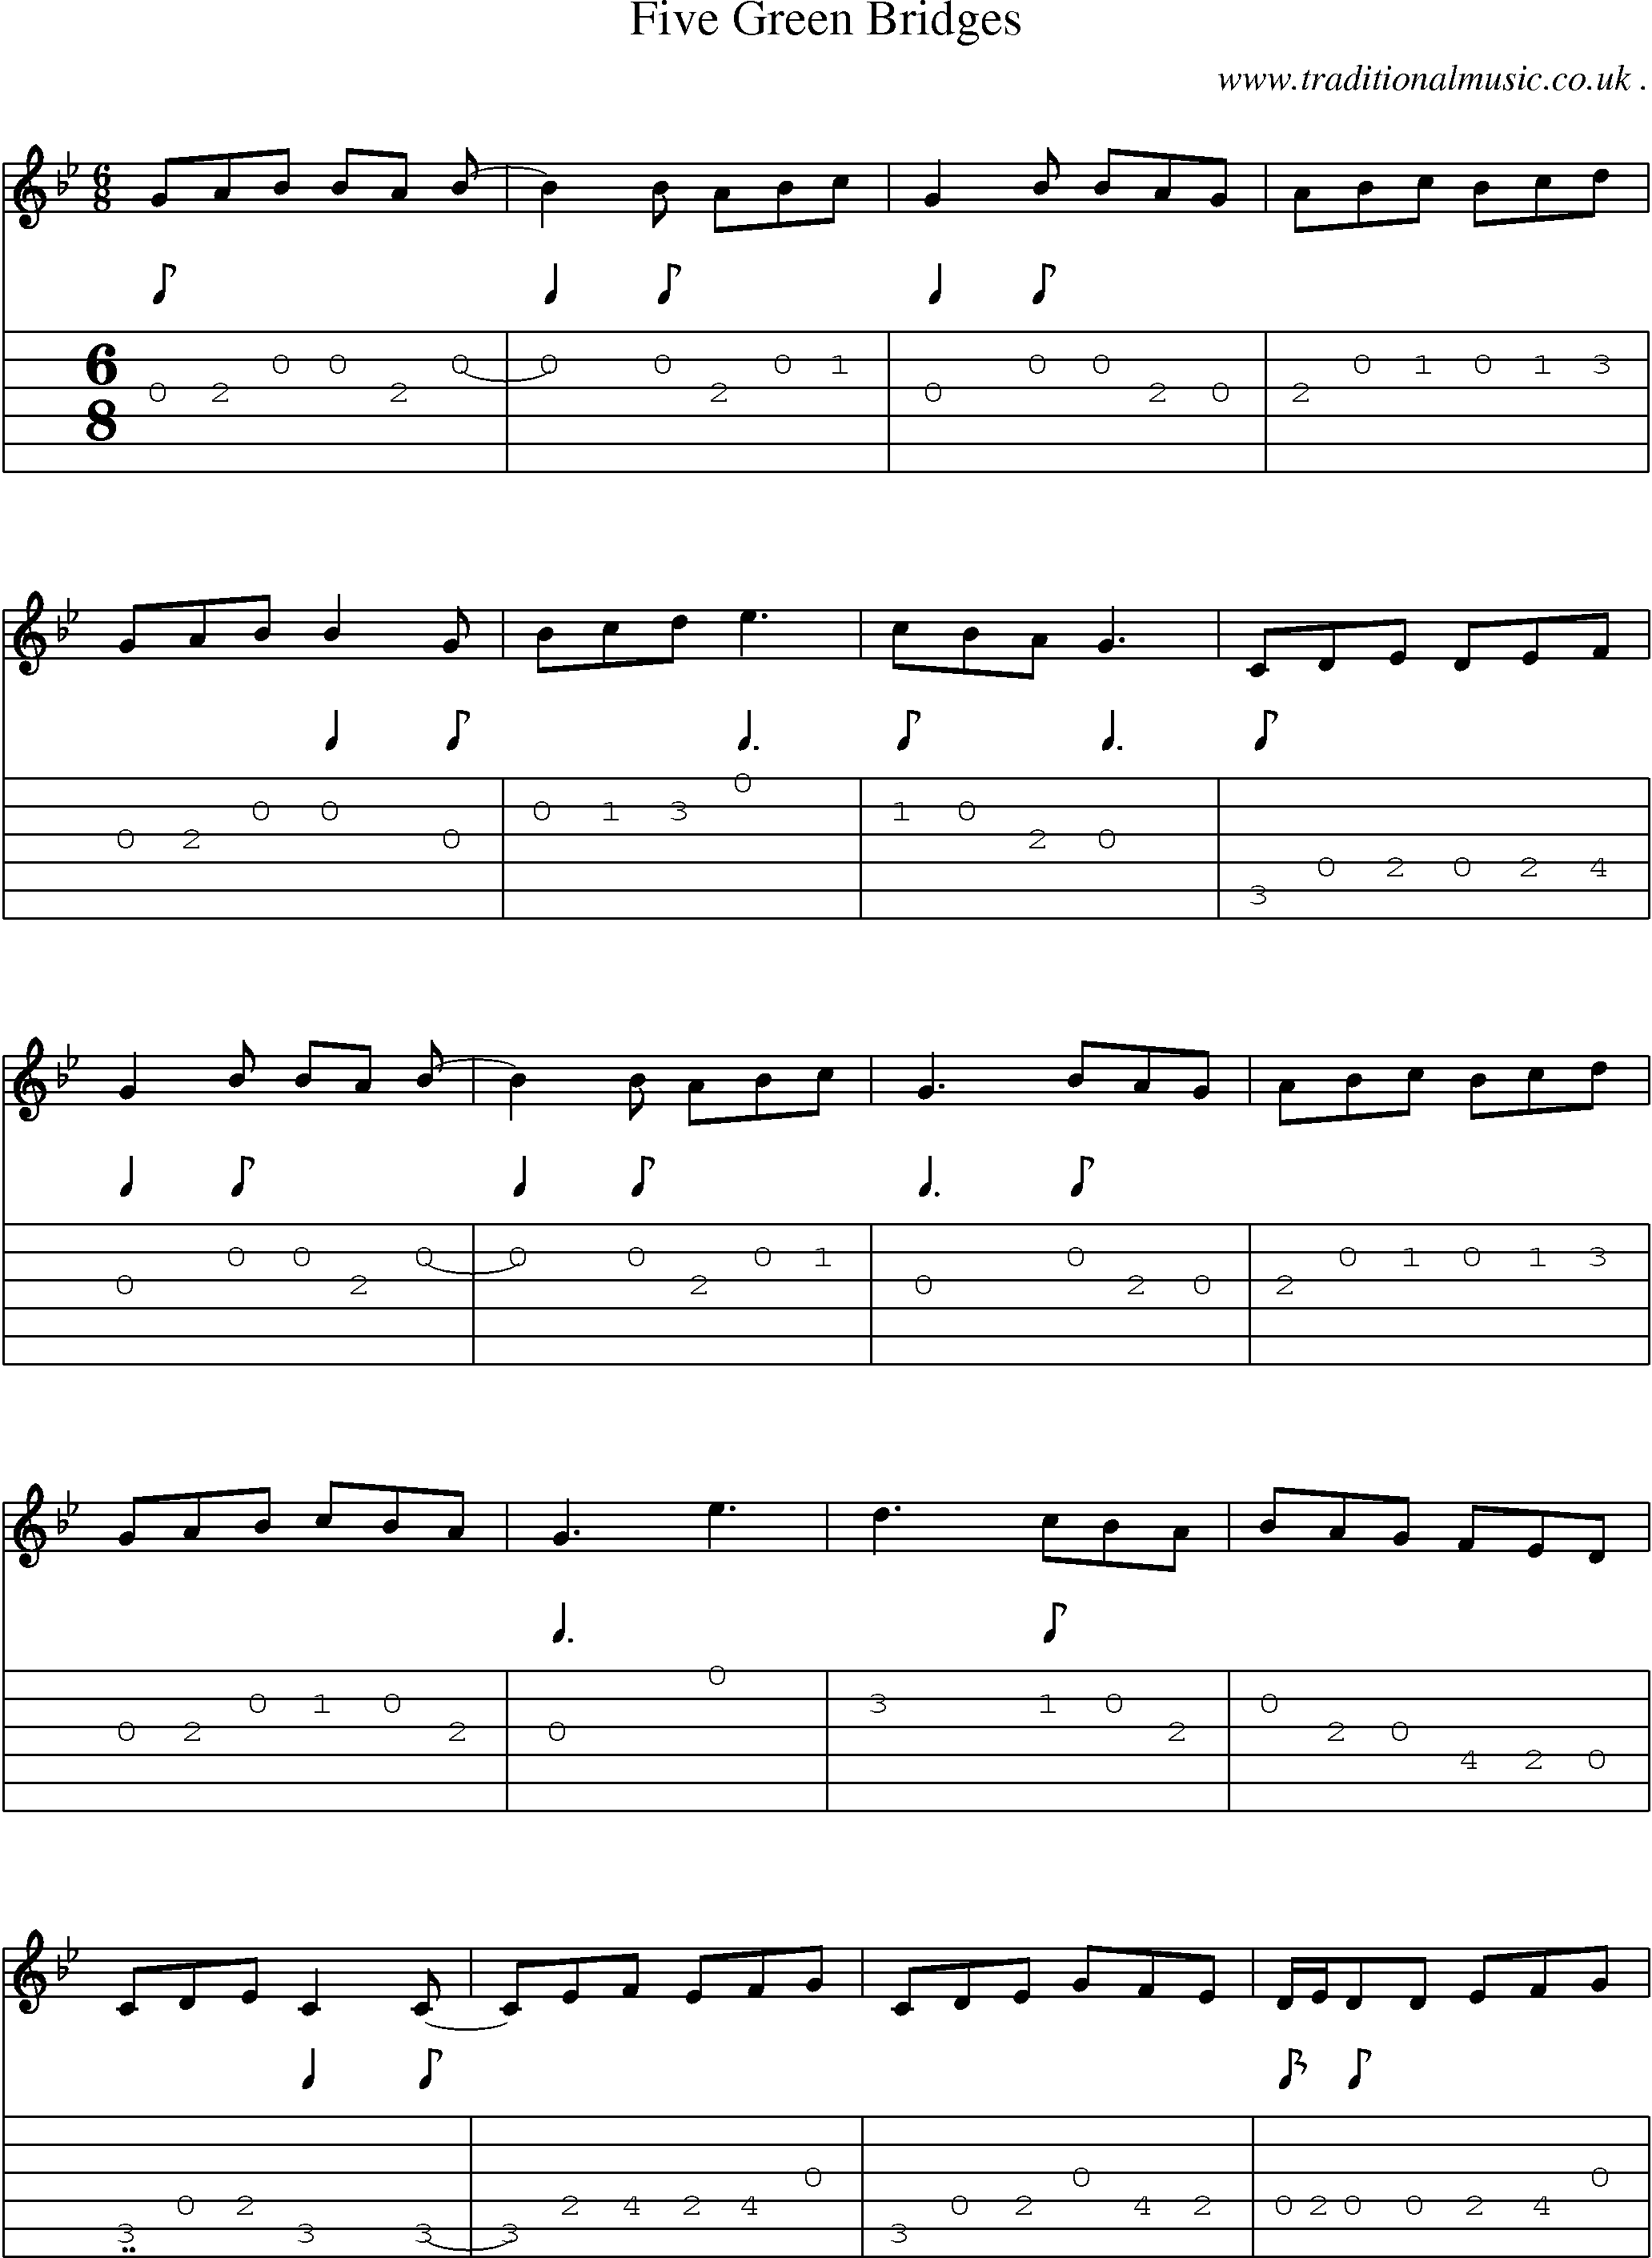 Sheet-Music and Guitar Tabs for Five Green Bridges